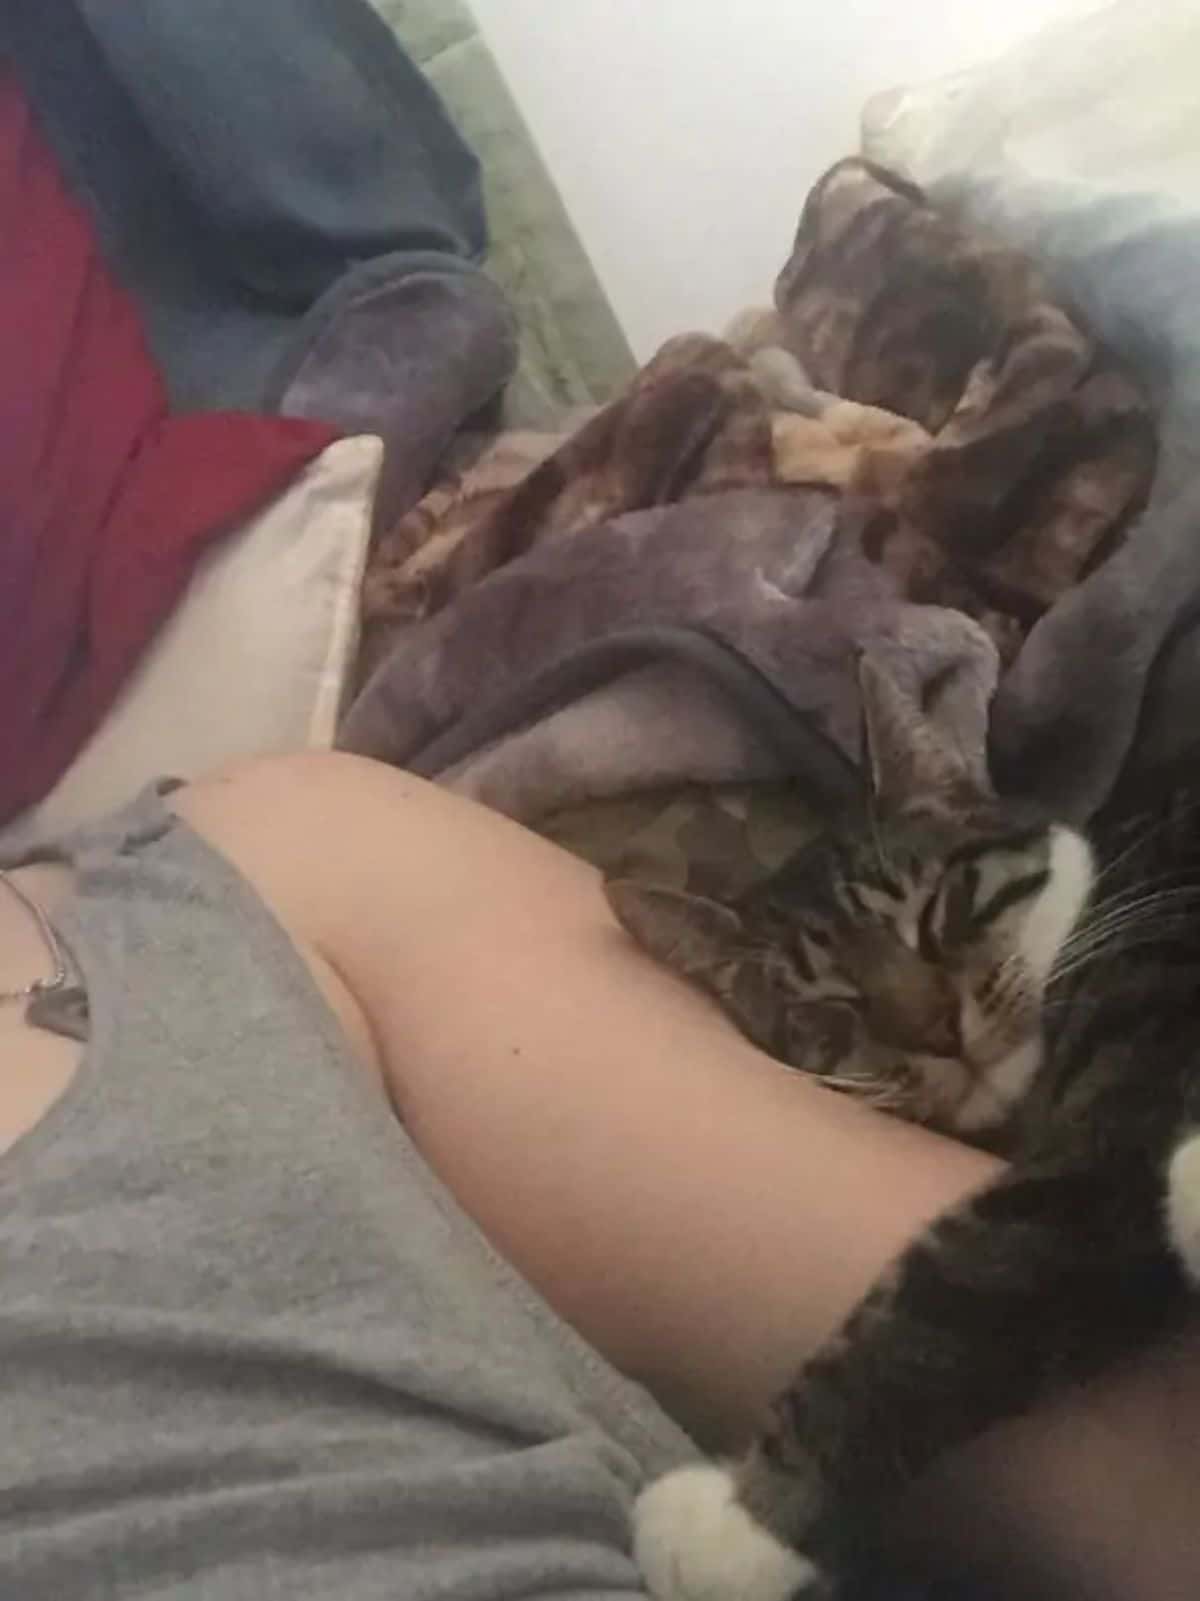 grey and white tabby sleeping ona bed cuddling someone's arm